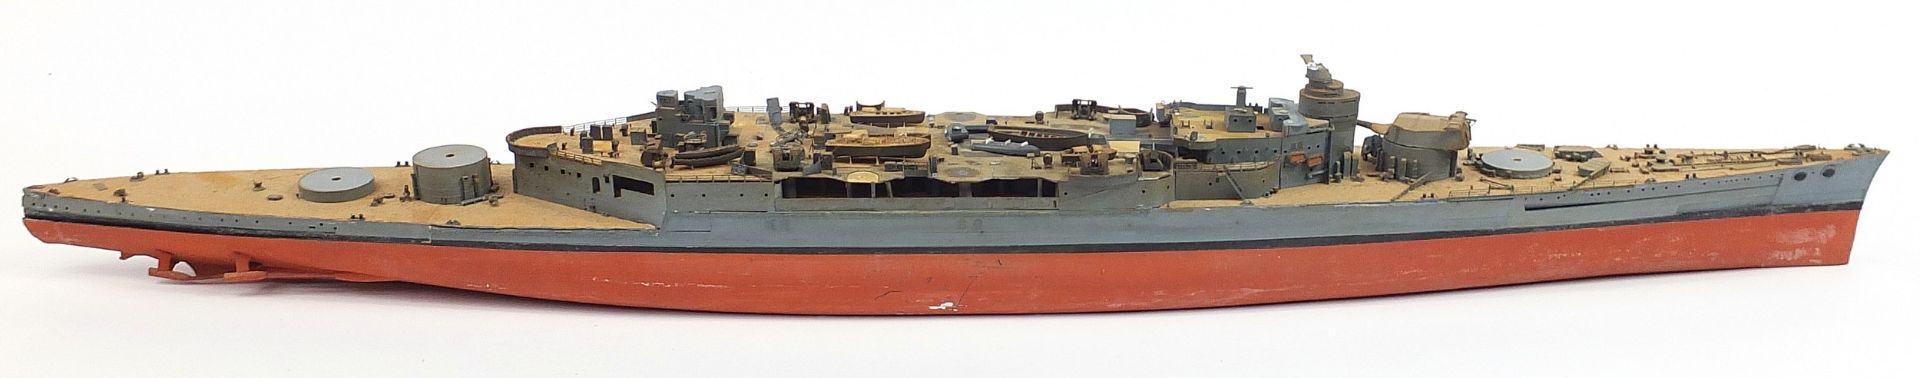 Large military interest model boat, 140cm in length - Image 5 of 5